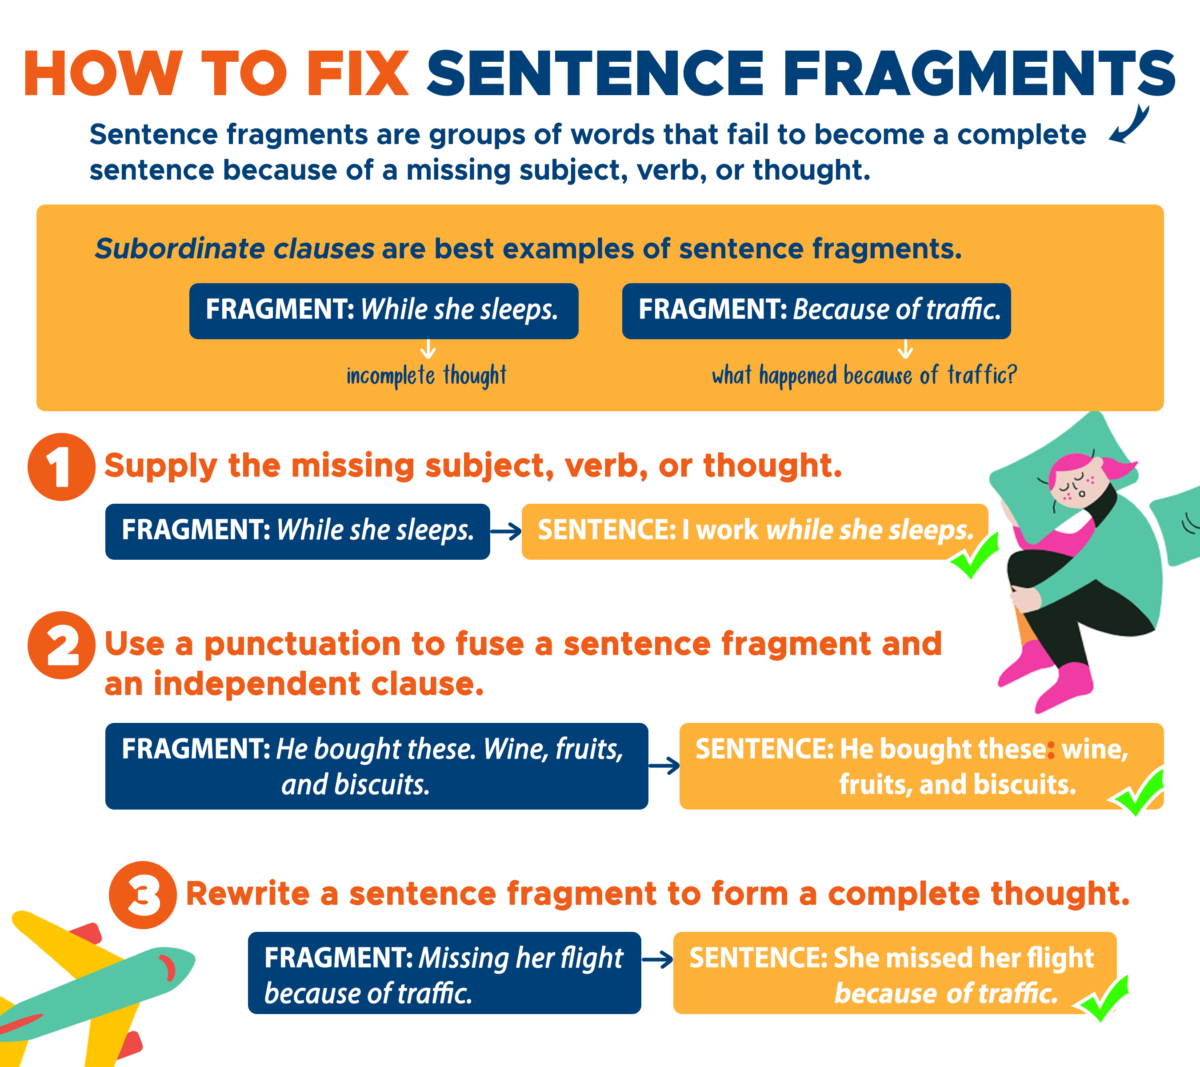 meaning of fragment in a sentence